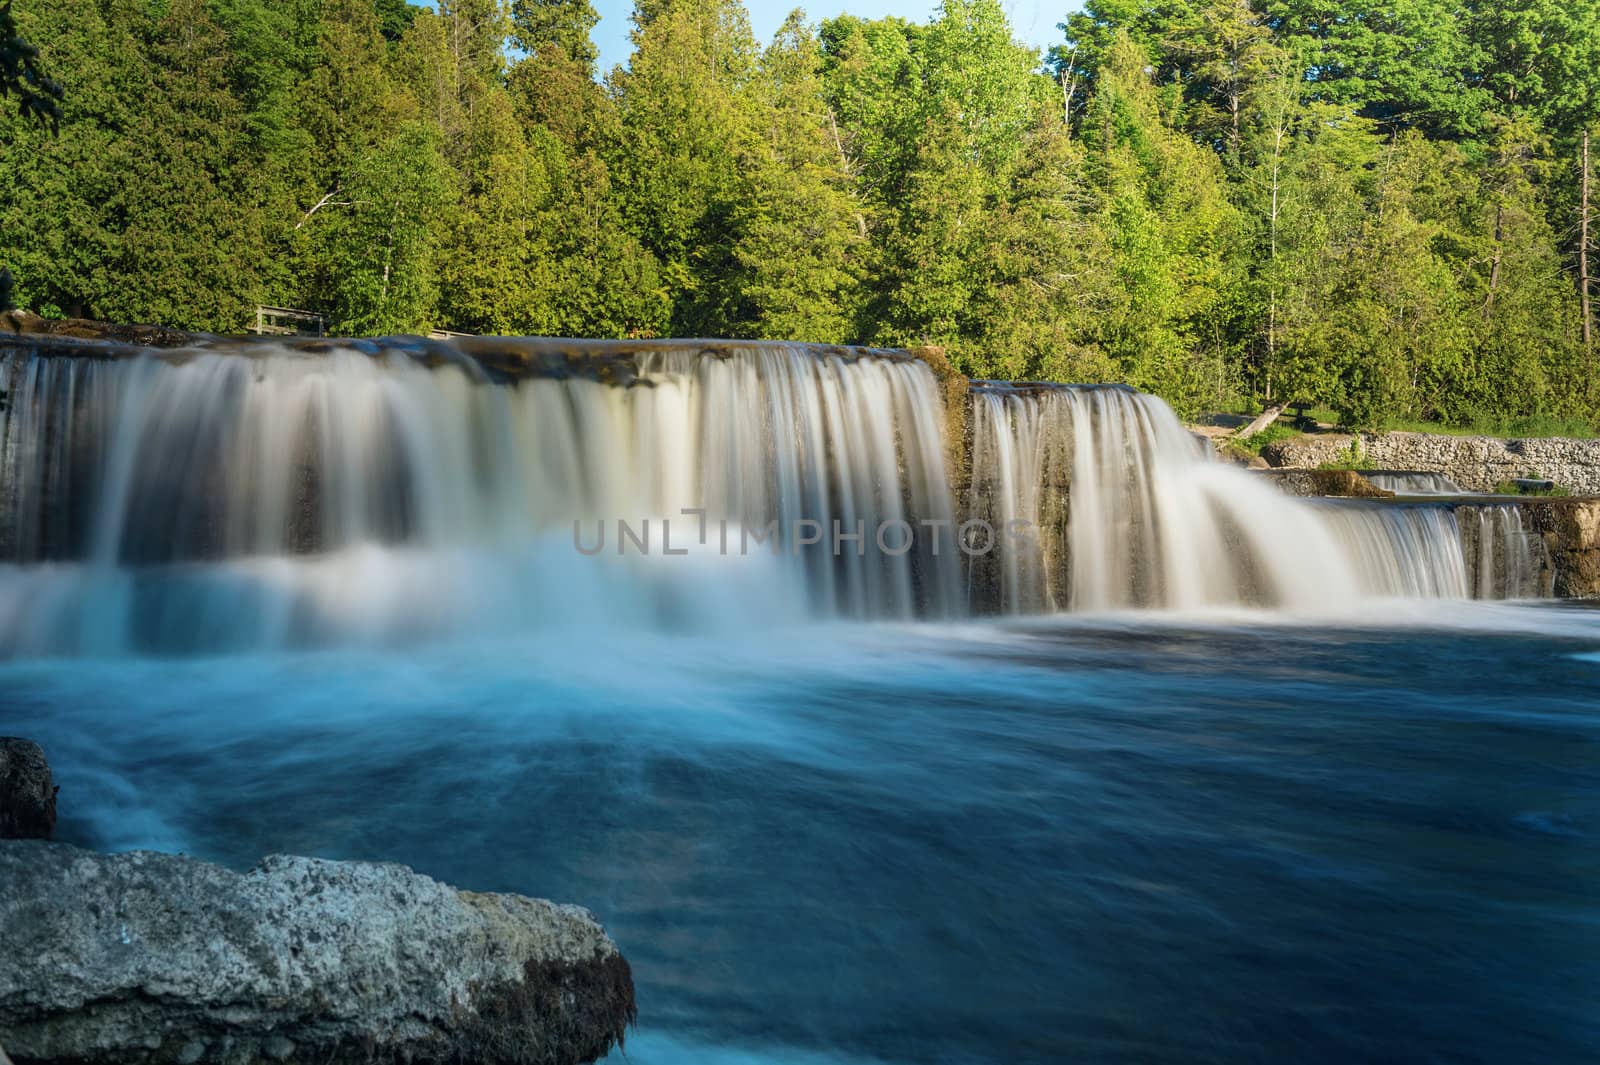 Sauble Falls in South Bruce Peninsula, Ontario, Canada by Marcus